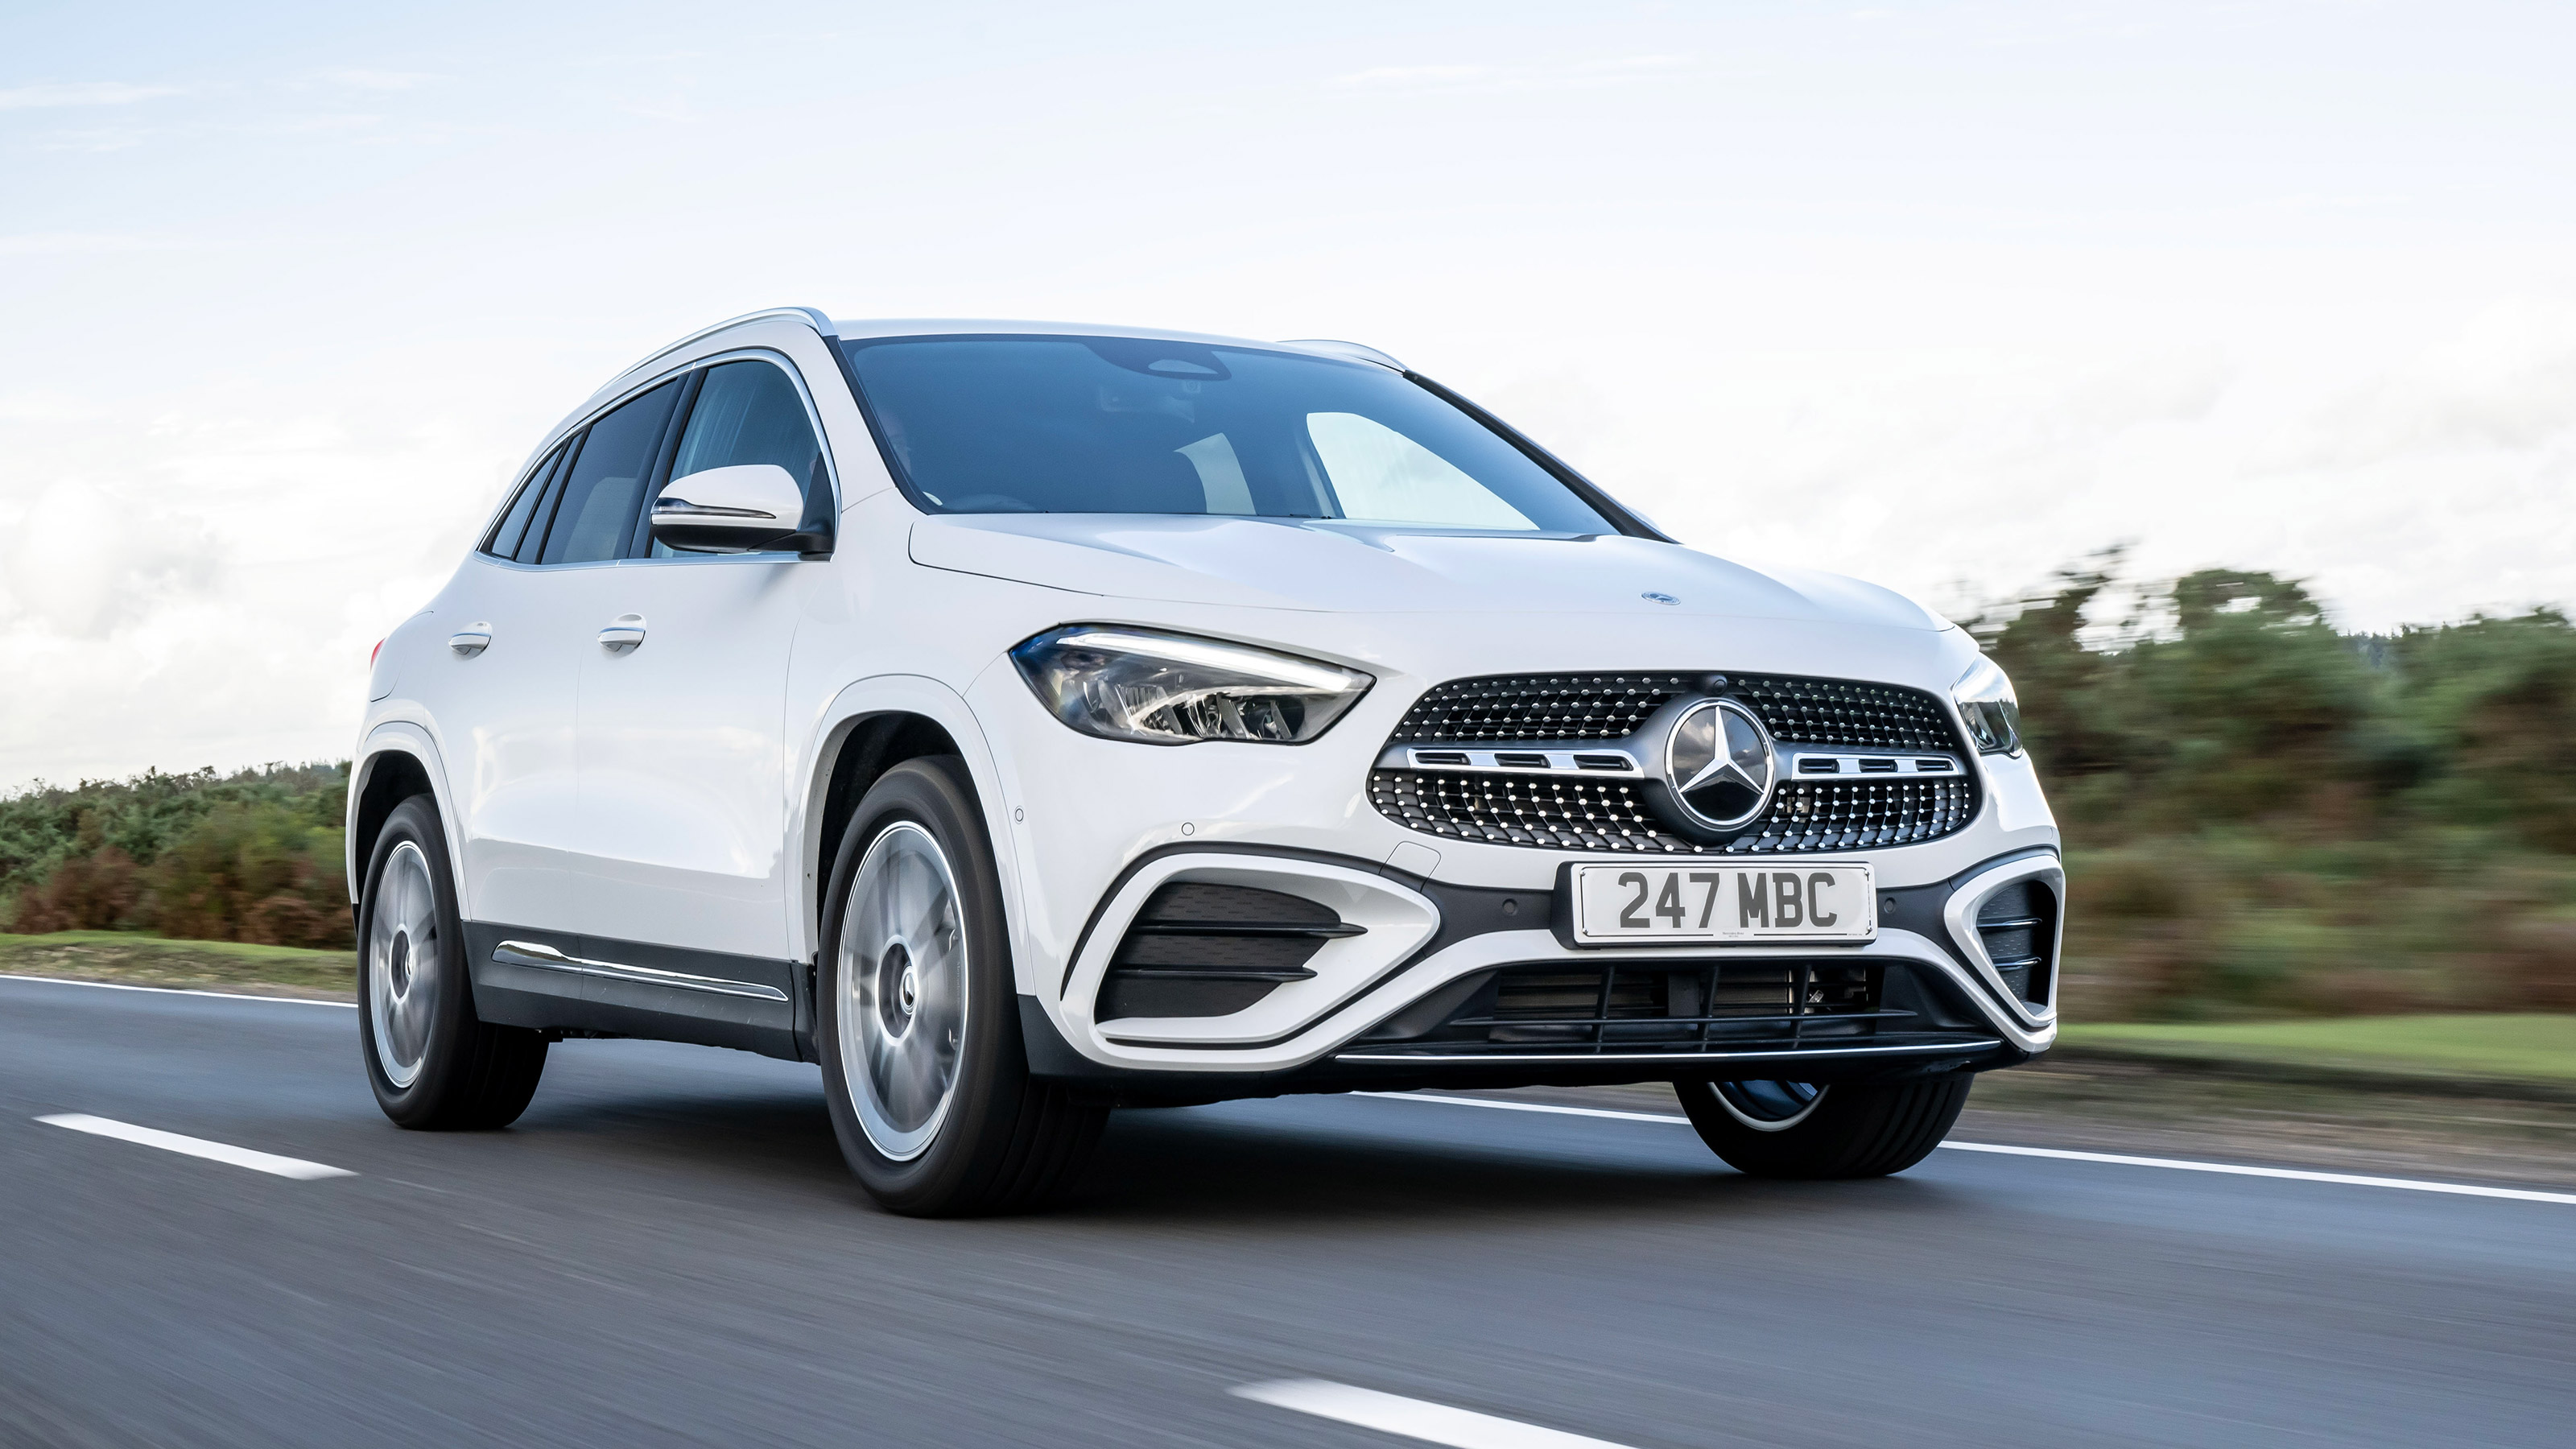 https://mediacloud.carbuyer.co.uk/image/private/s--EeQ4qVXF--/v1697451107/carbuyer/2023/10/Mercedes%20GLA%20facelift%20review-17.jpg